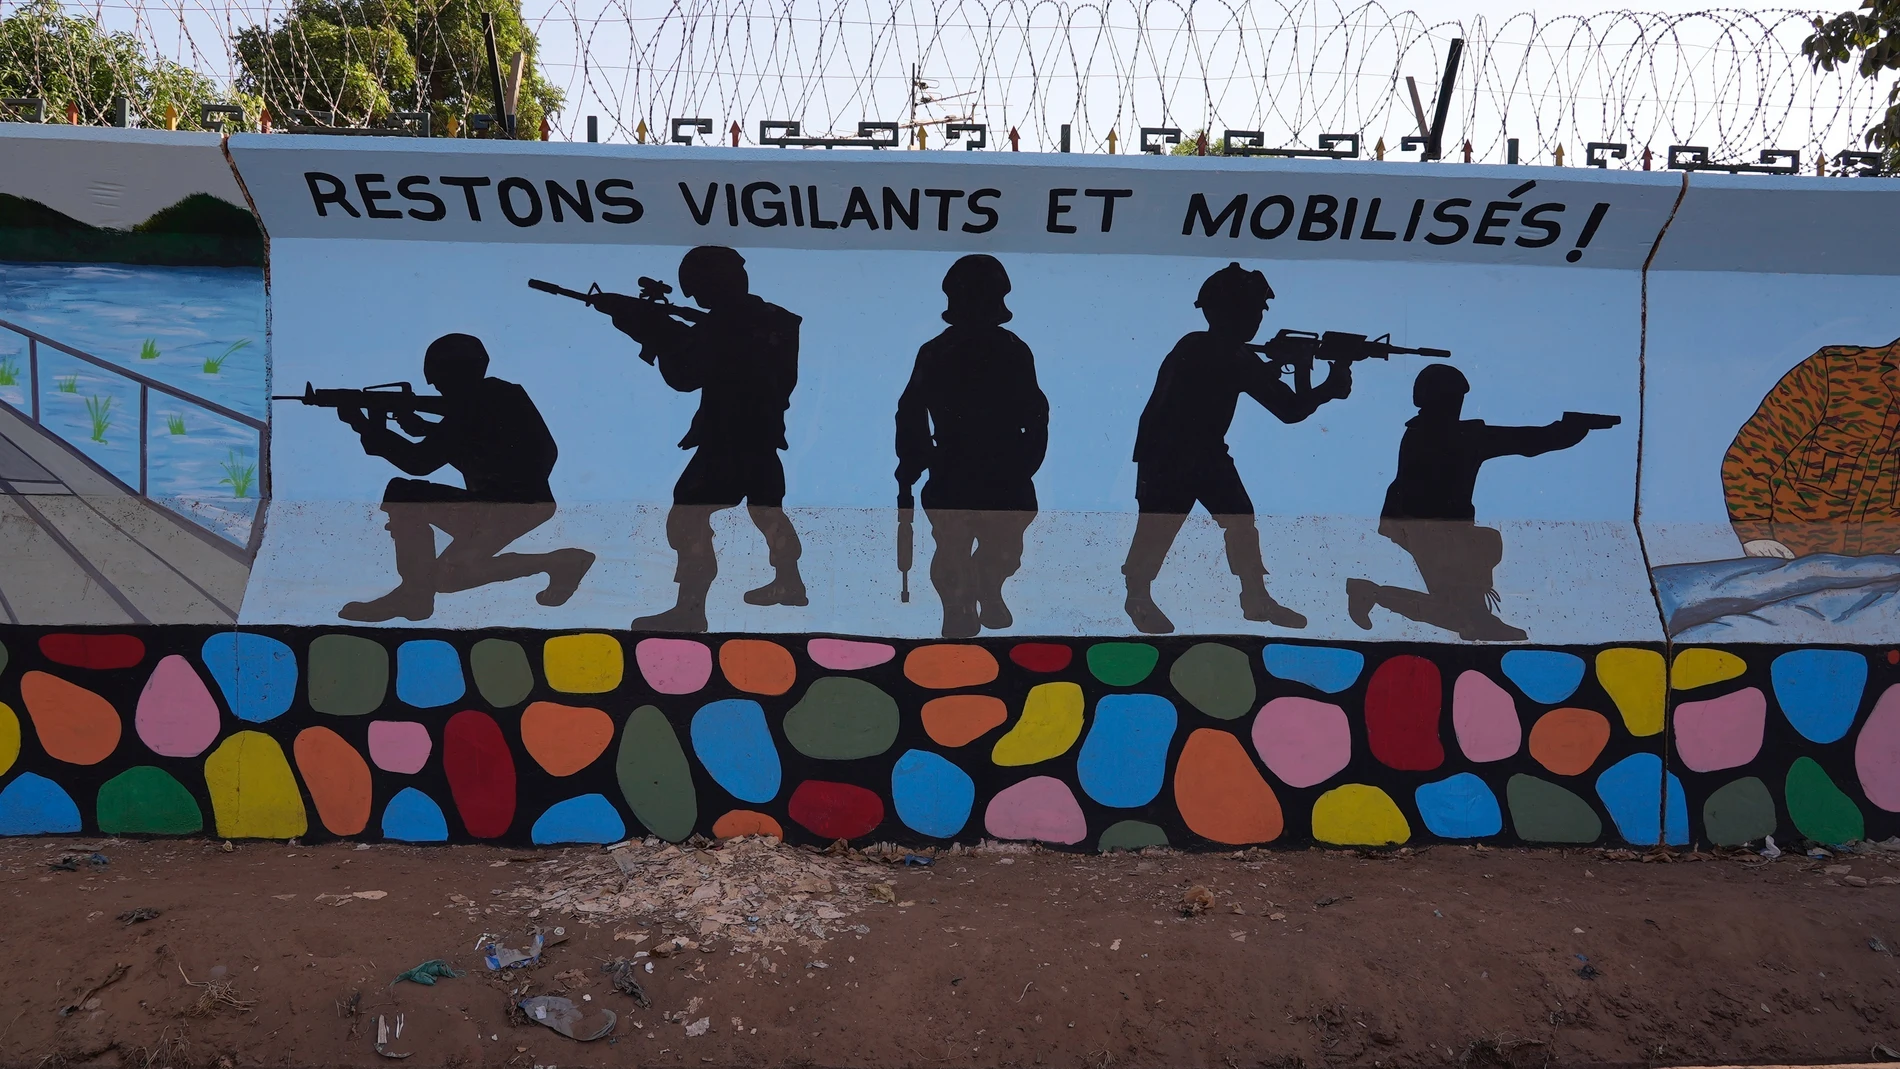 FILE - A mural is seen in Ouagadougou, Burkina Faso, on March 1, 2023. A new report by Human Rights Watch says Burkina Faso’s security forces killed at least 60 civilians in three different drone strikes which the West African nation’s military government claimed were targeting extremists. (AP Photo, File)